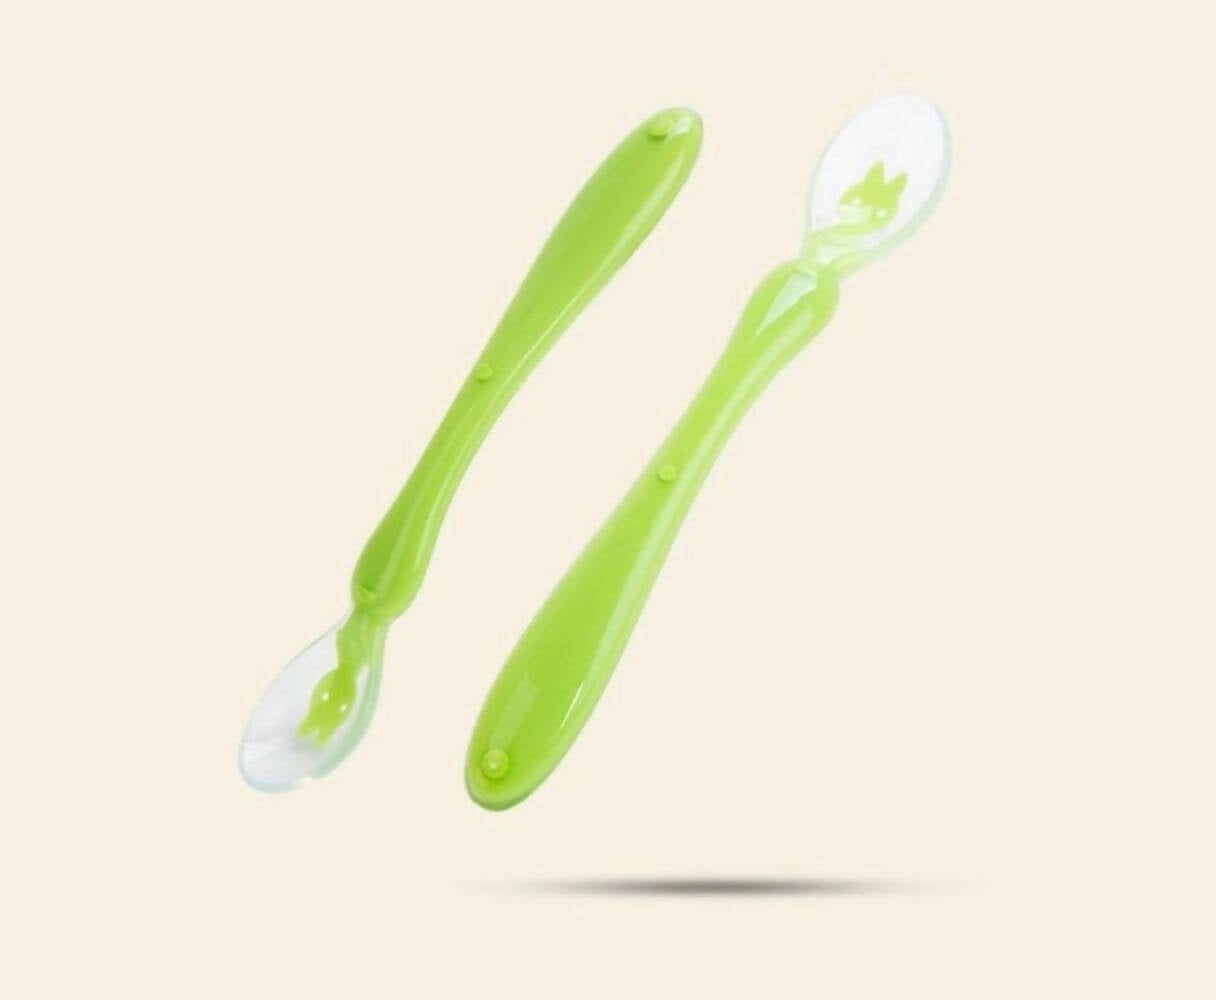 Safe-O-Kid Soft Silicone Tip Spoons Set Box (2 Spoons), Blue & Green